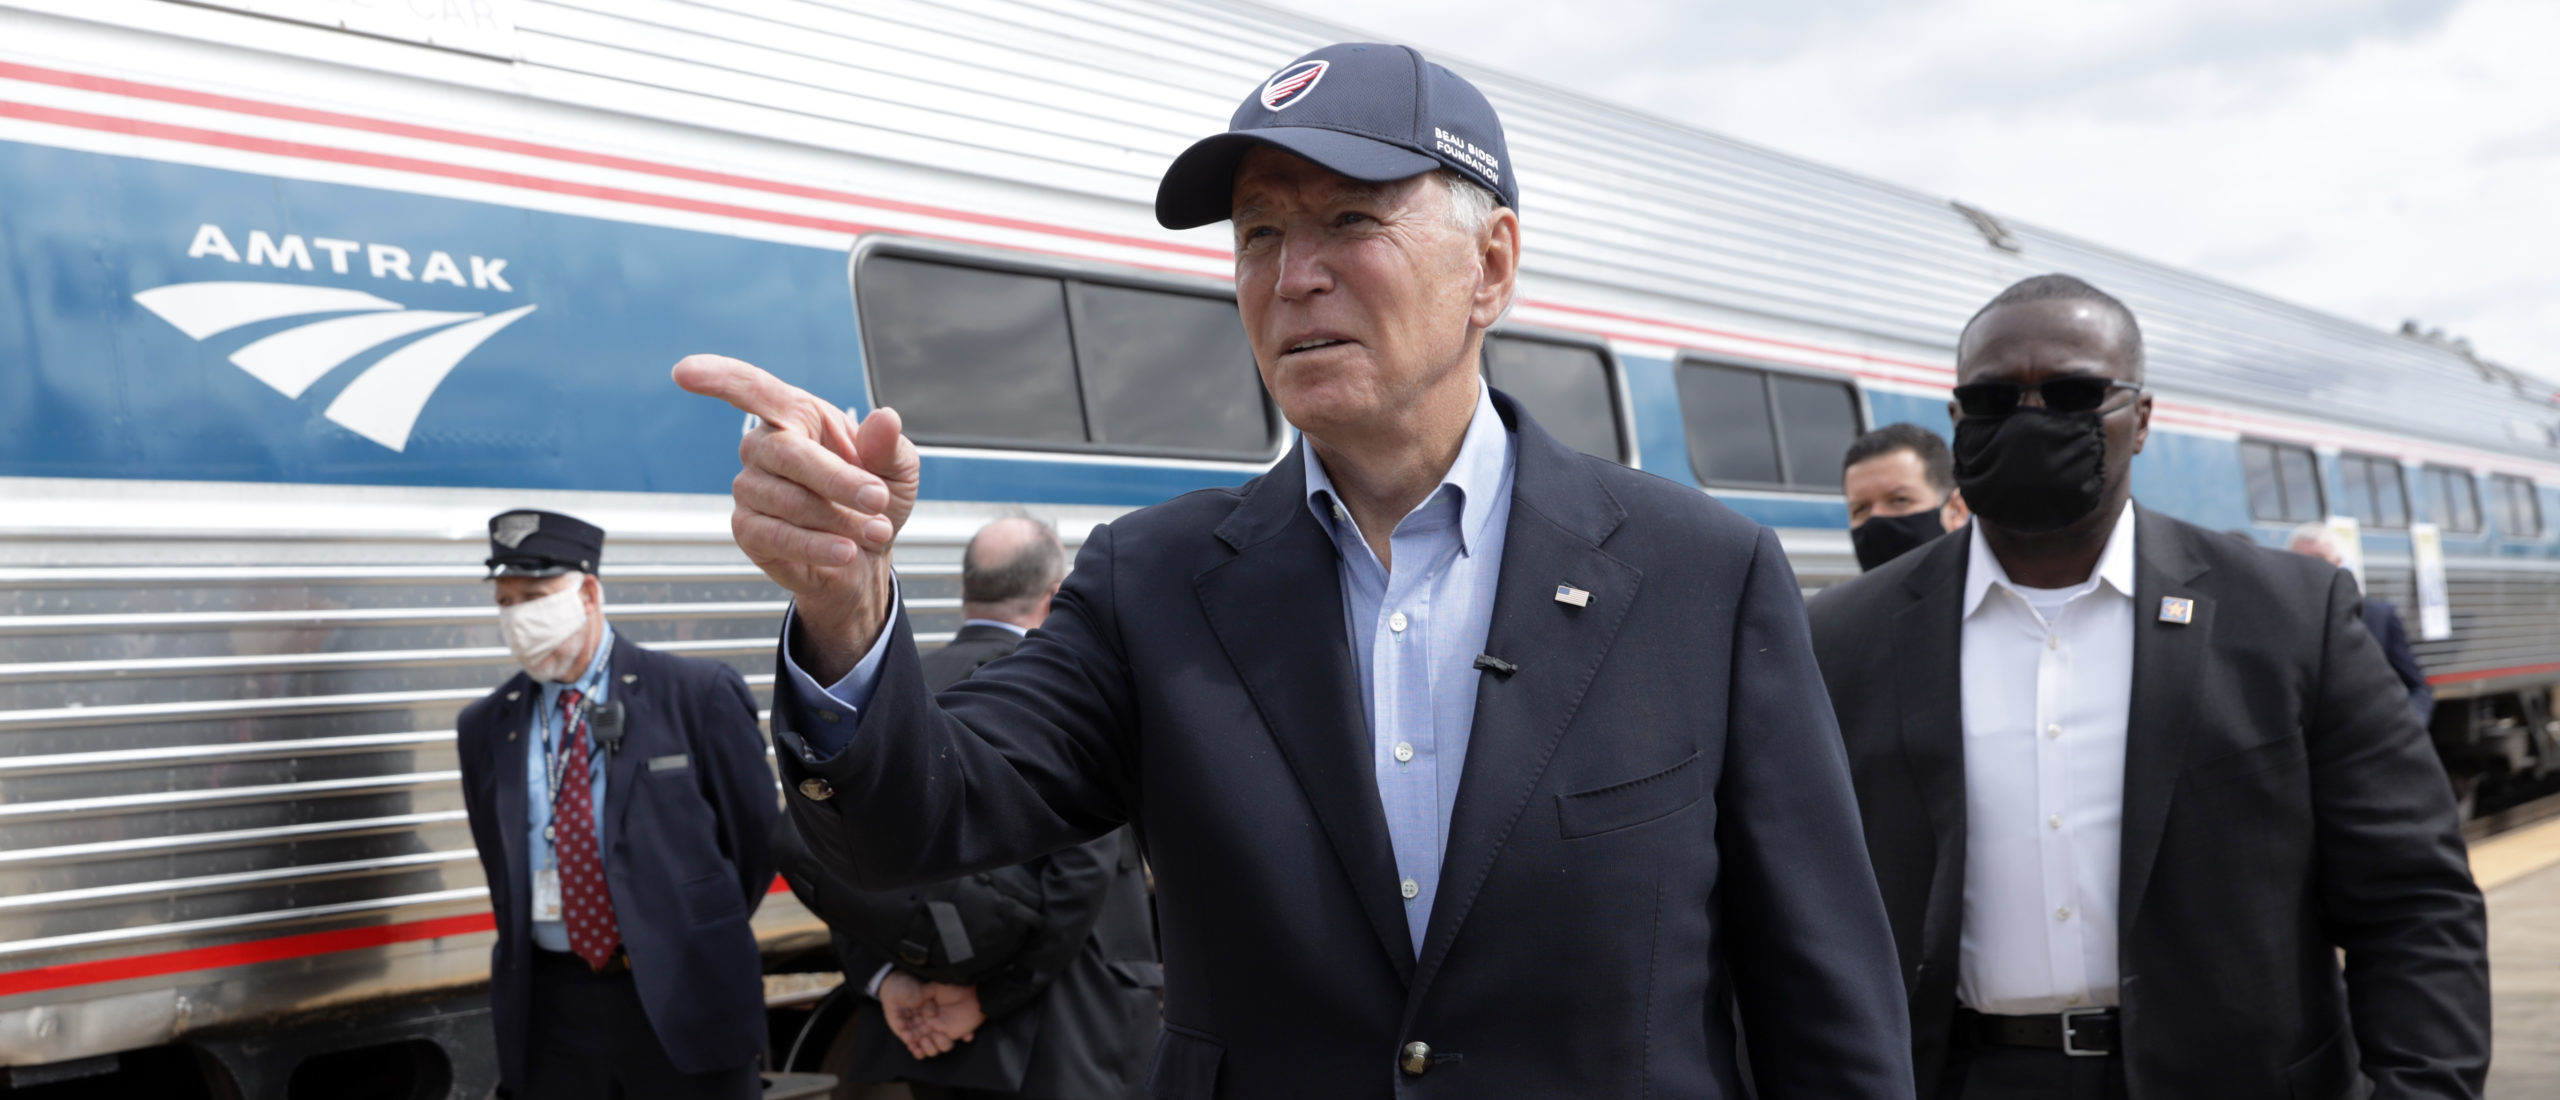 Joe Biden gestures during a campaign stop at Alliance Amtrak Station in Ohio. (Photo by Alex Wong/Getty Images)